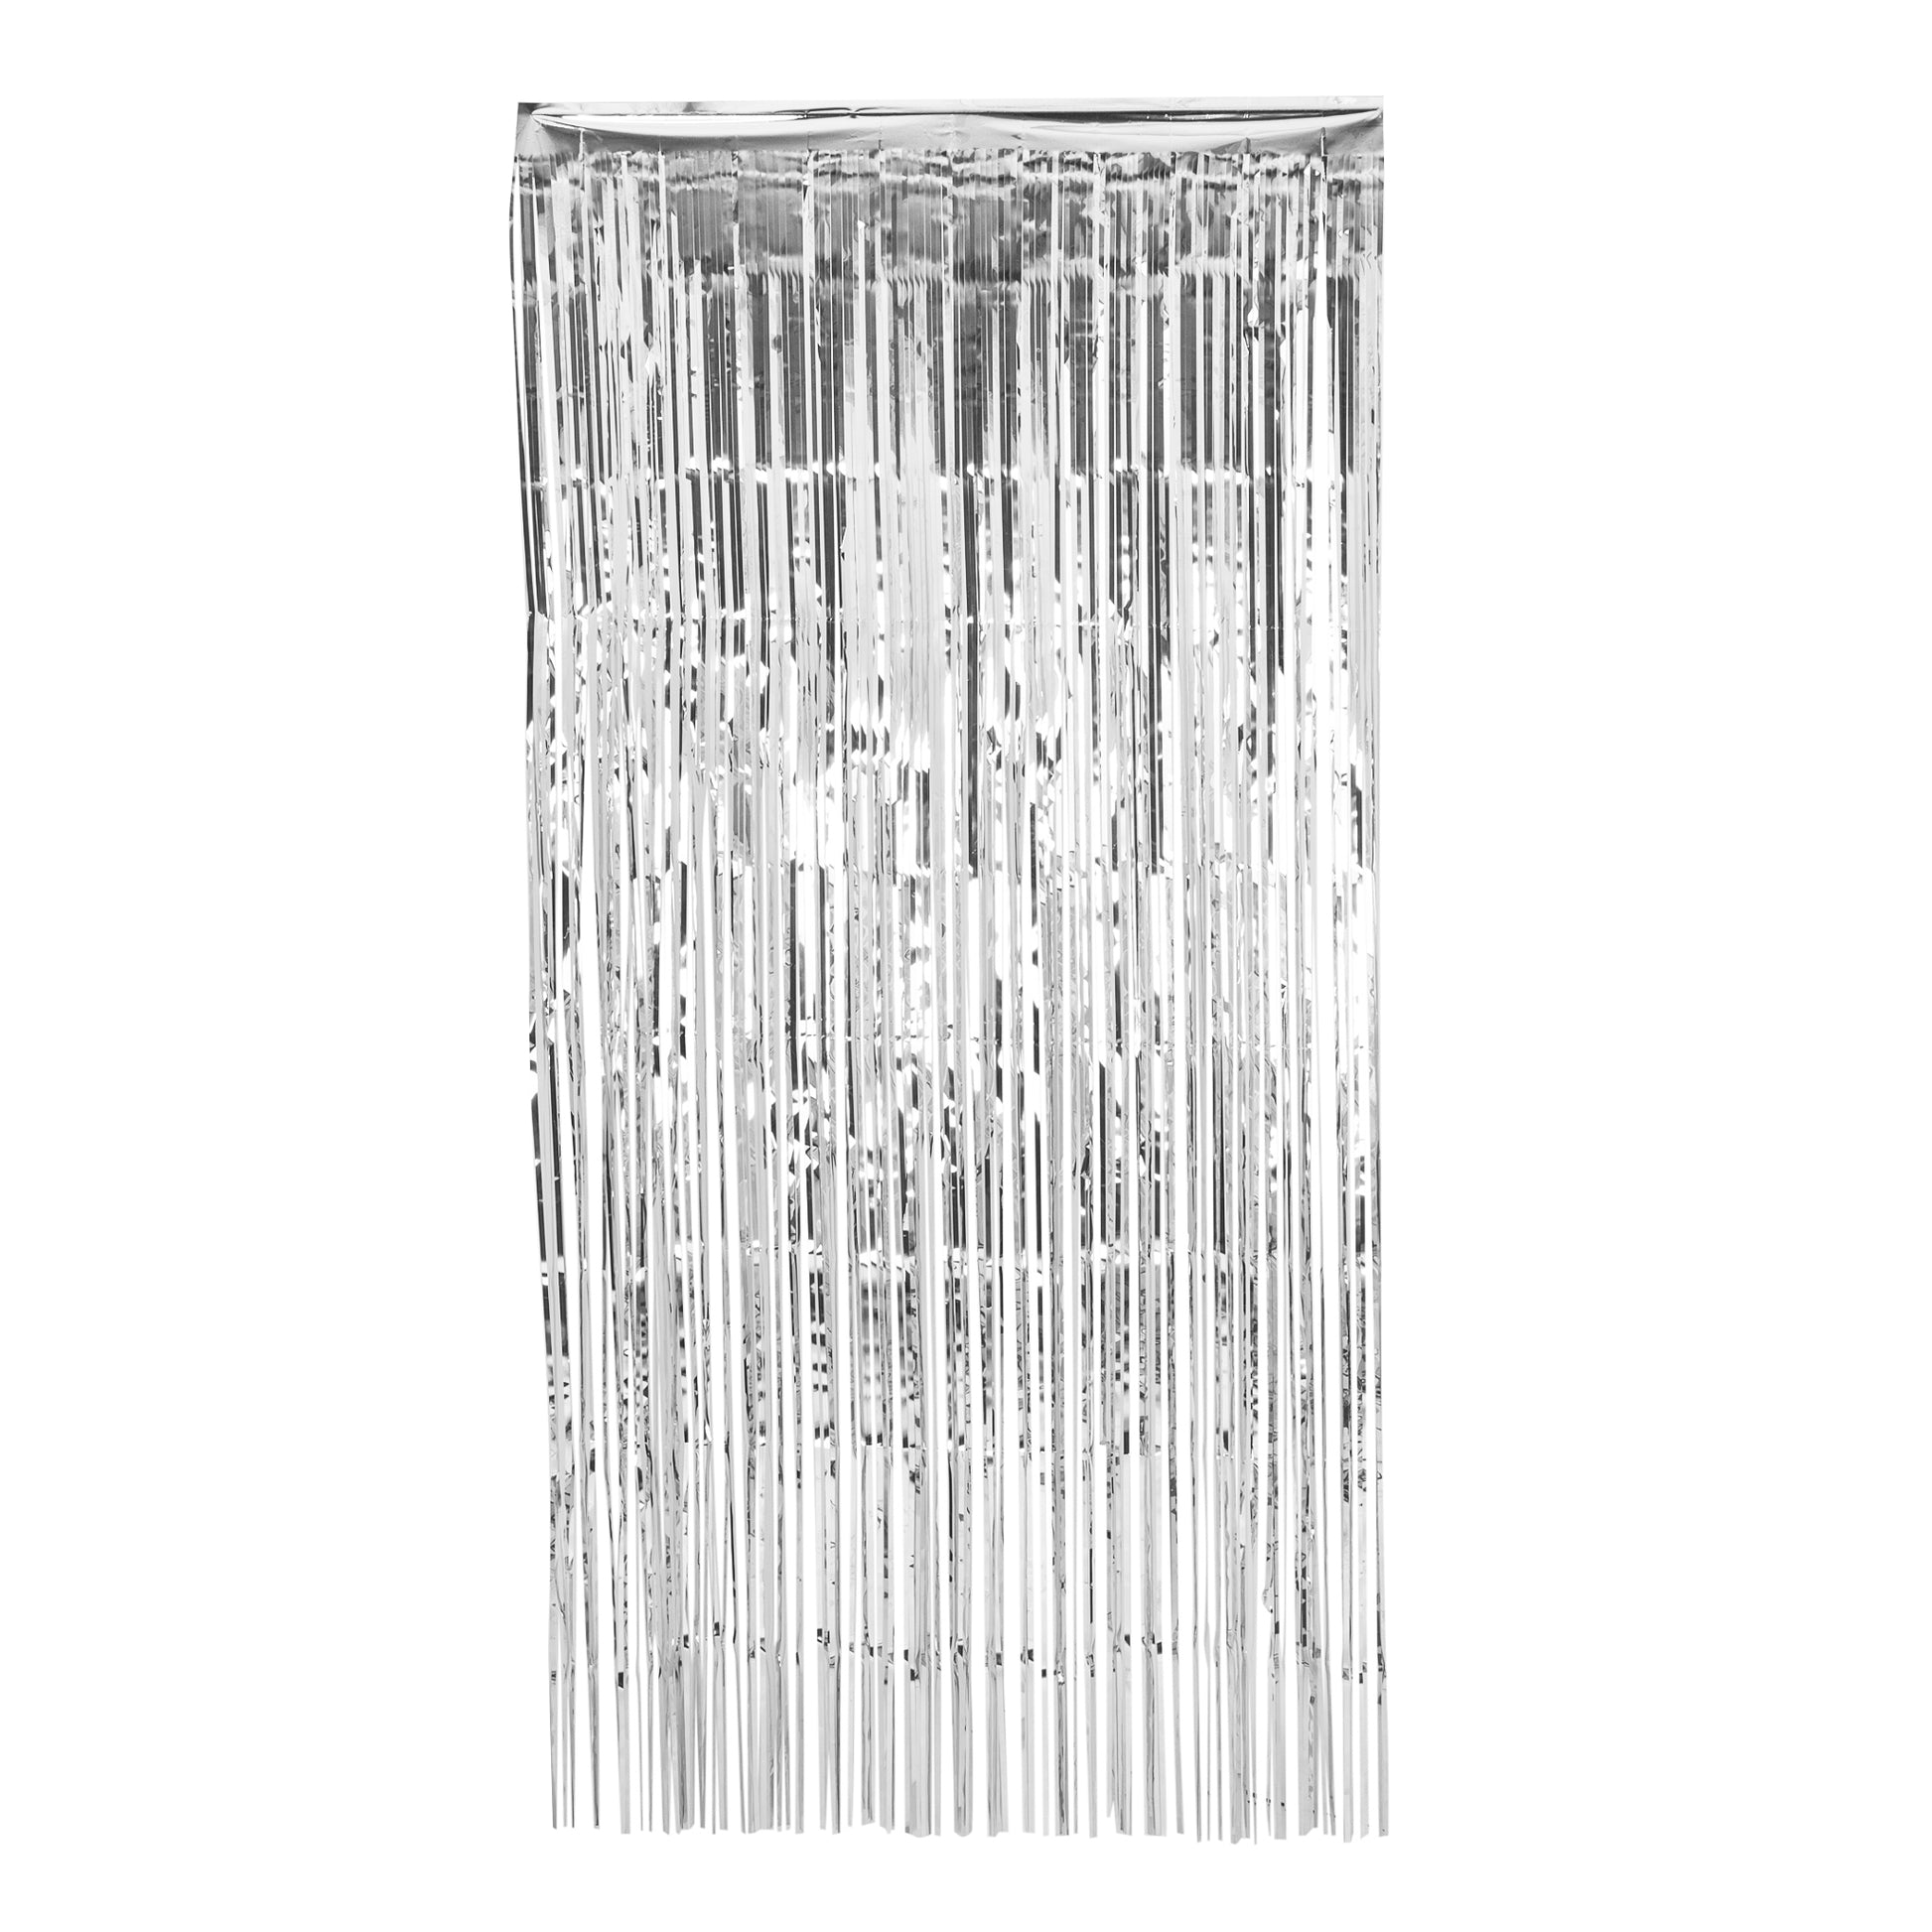 Metallic Photo Booth Backdrop Tinsel Silver Foil Fringe Curtain